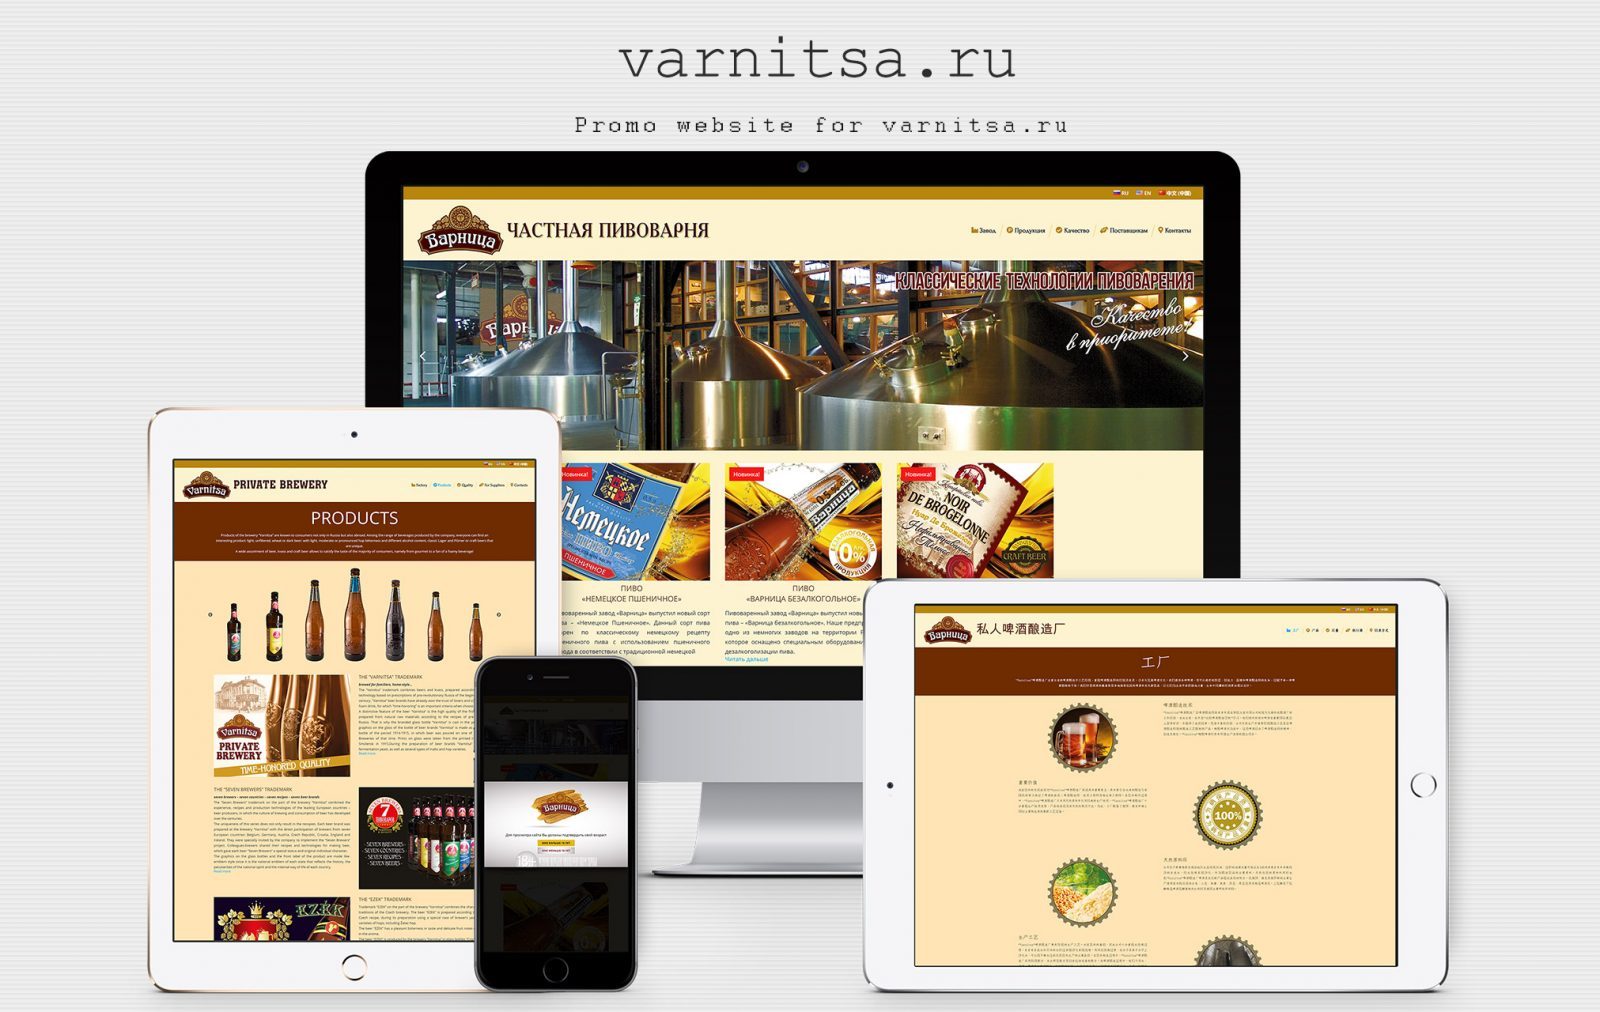 Website for a private brewery - Varnitsa 1